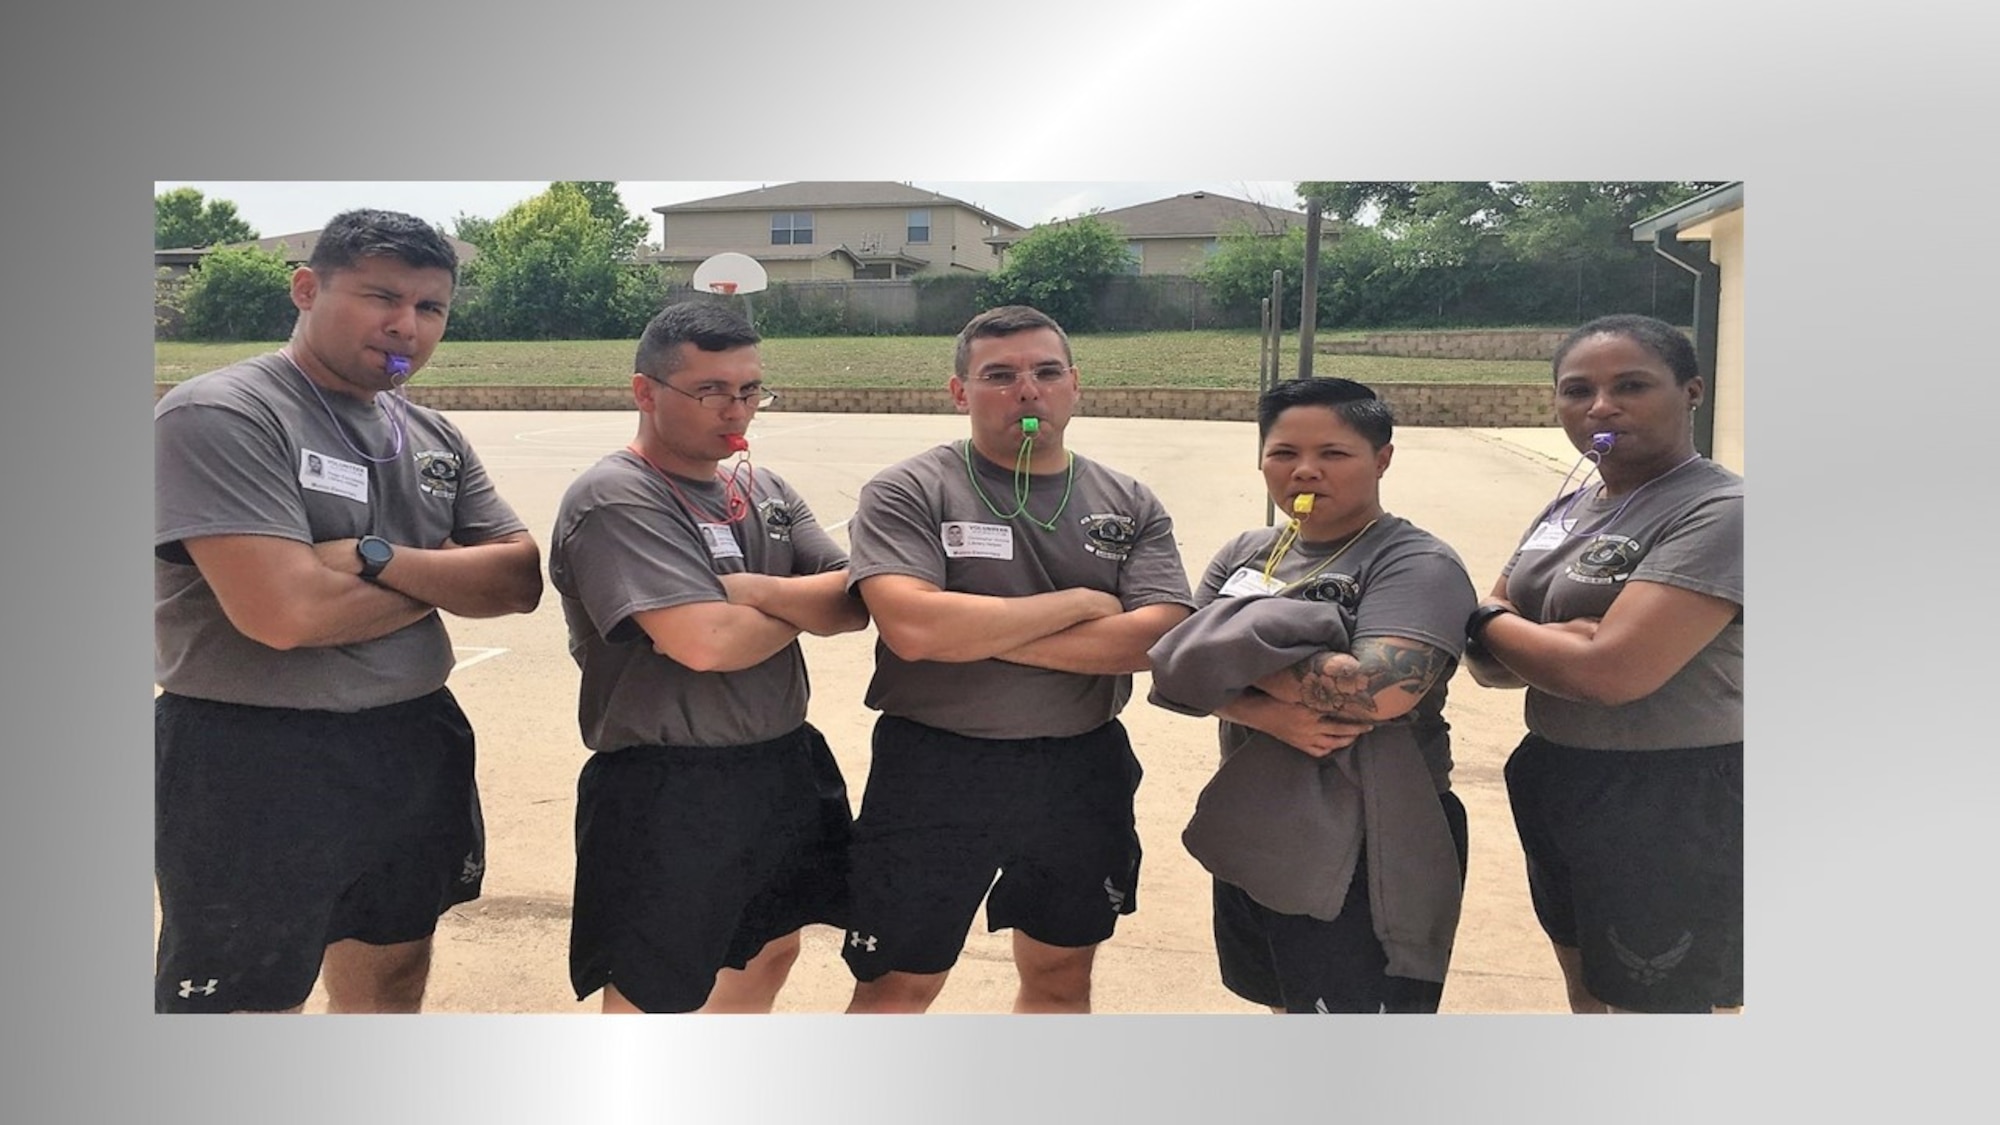 Kudos to the 433rd Training Squadron members who recently created a fun, challenging opportunity for Murnin Elementary School students!  Squadron volunteers (left to right) Master Sgt. Hugo Escobedo, Tech. Sgt. Jason Hernandez, 433rd Commander Lt. Col. Christopher Victoria, Tech. Sgt. Christina Rapolla and Master Sgt. Rosalind Rider-Page put 150 Murnin reading test champs through an obstacle course developed by faculty and 433rd members as a special reward and incentive to encourage the kids to ace the reading requirements. Obstacles included tire flipping, wall jumps, jumping over small balusters, running between cones and more. Sergeant Rapolla, event organizer, noted that these kind of events encourage kids to develop mental and physical skills and help make both more fun. She said the 433rd is ready for another round - better hit the books kids! (U.S. Air Force photo courtesy of the 433rd TRS)